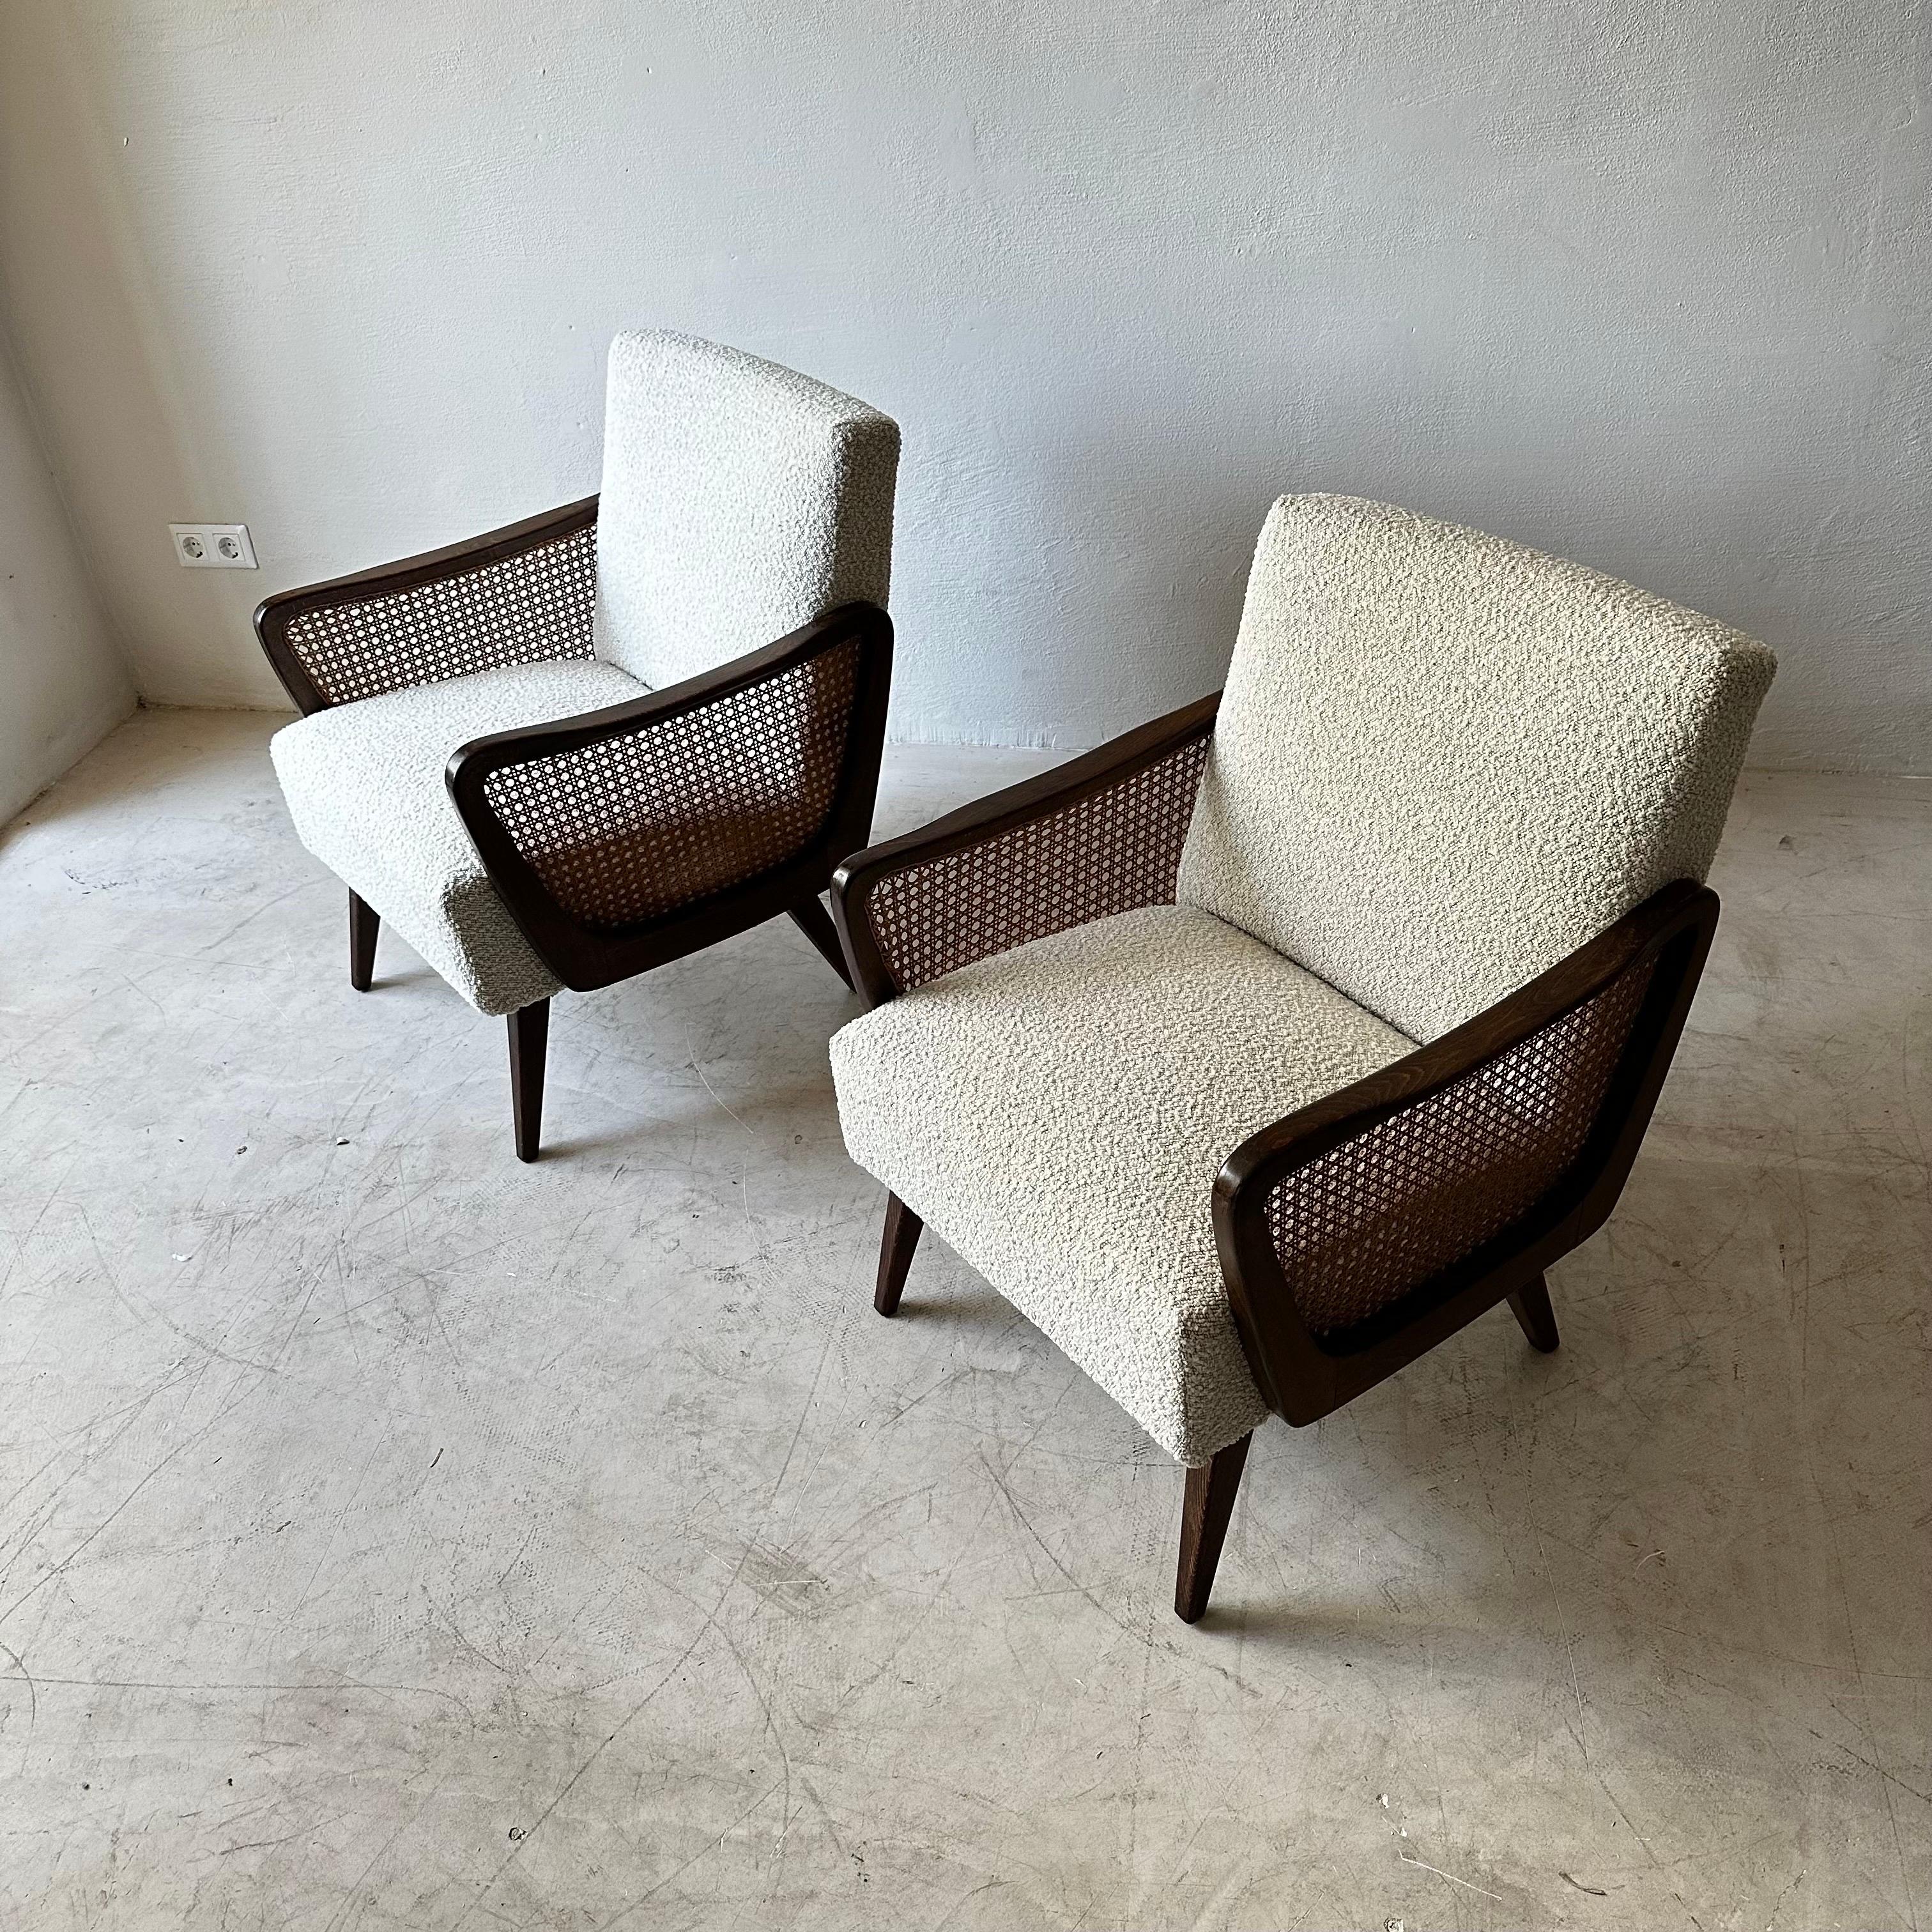 Mid-20th Century Austrian Arm Chairs in Boucle and Wicker, 1950s For Sale